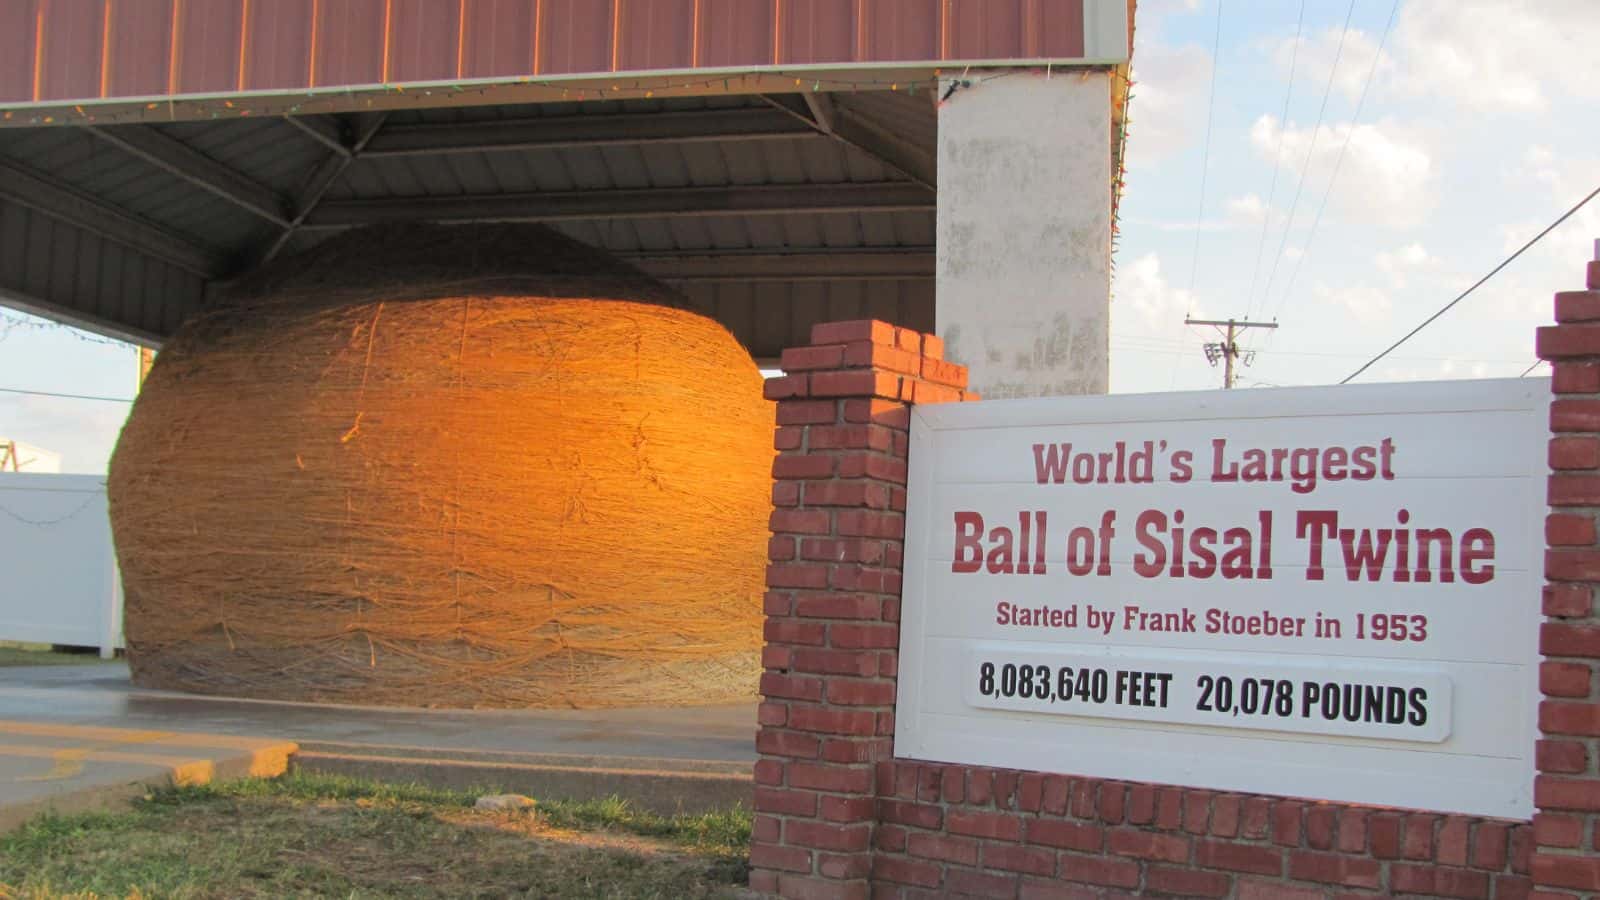 <p>Let’s kick things off with the World’s Largest Ball of Twine in Kansas. Sure, it’s big and it’s made of twine, but is it really worth a detour? Chances are, even locals haven’t been there more than once—if at all!</p>